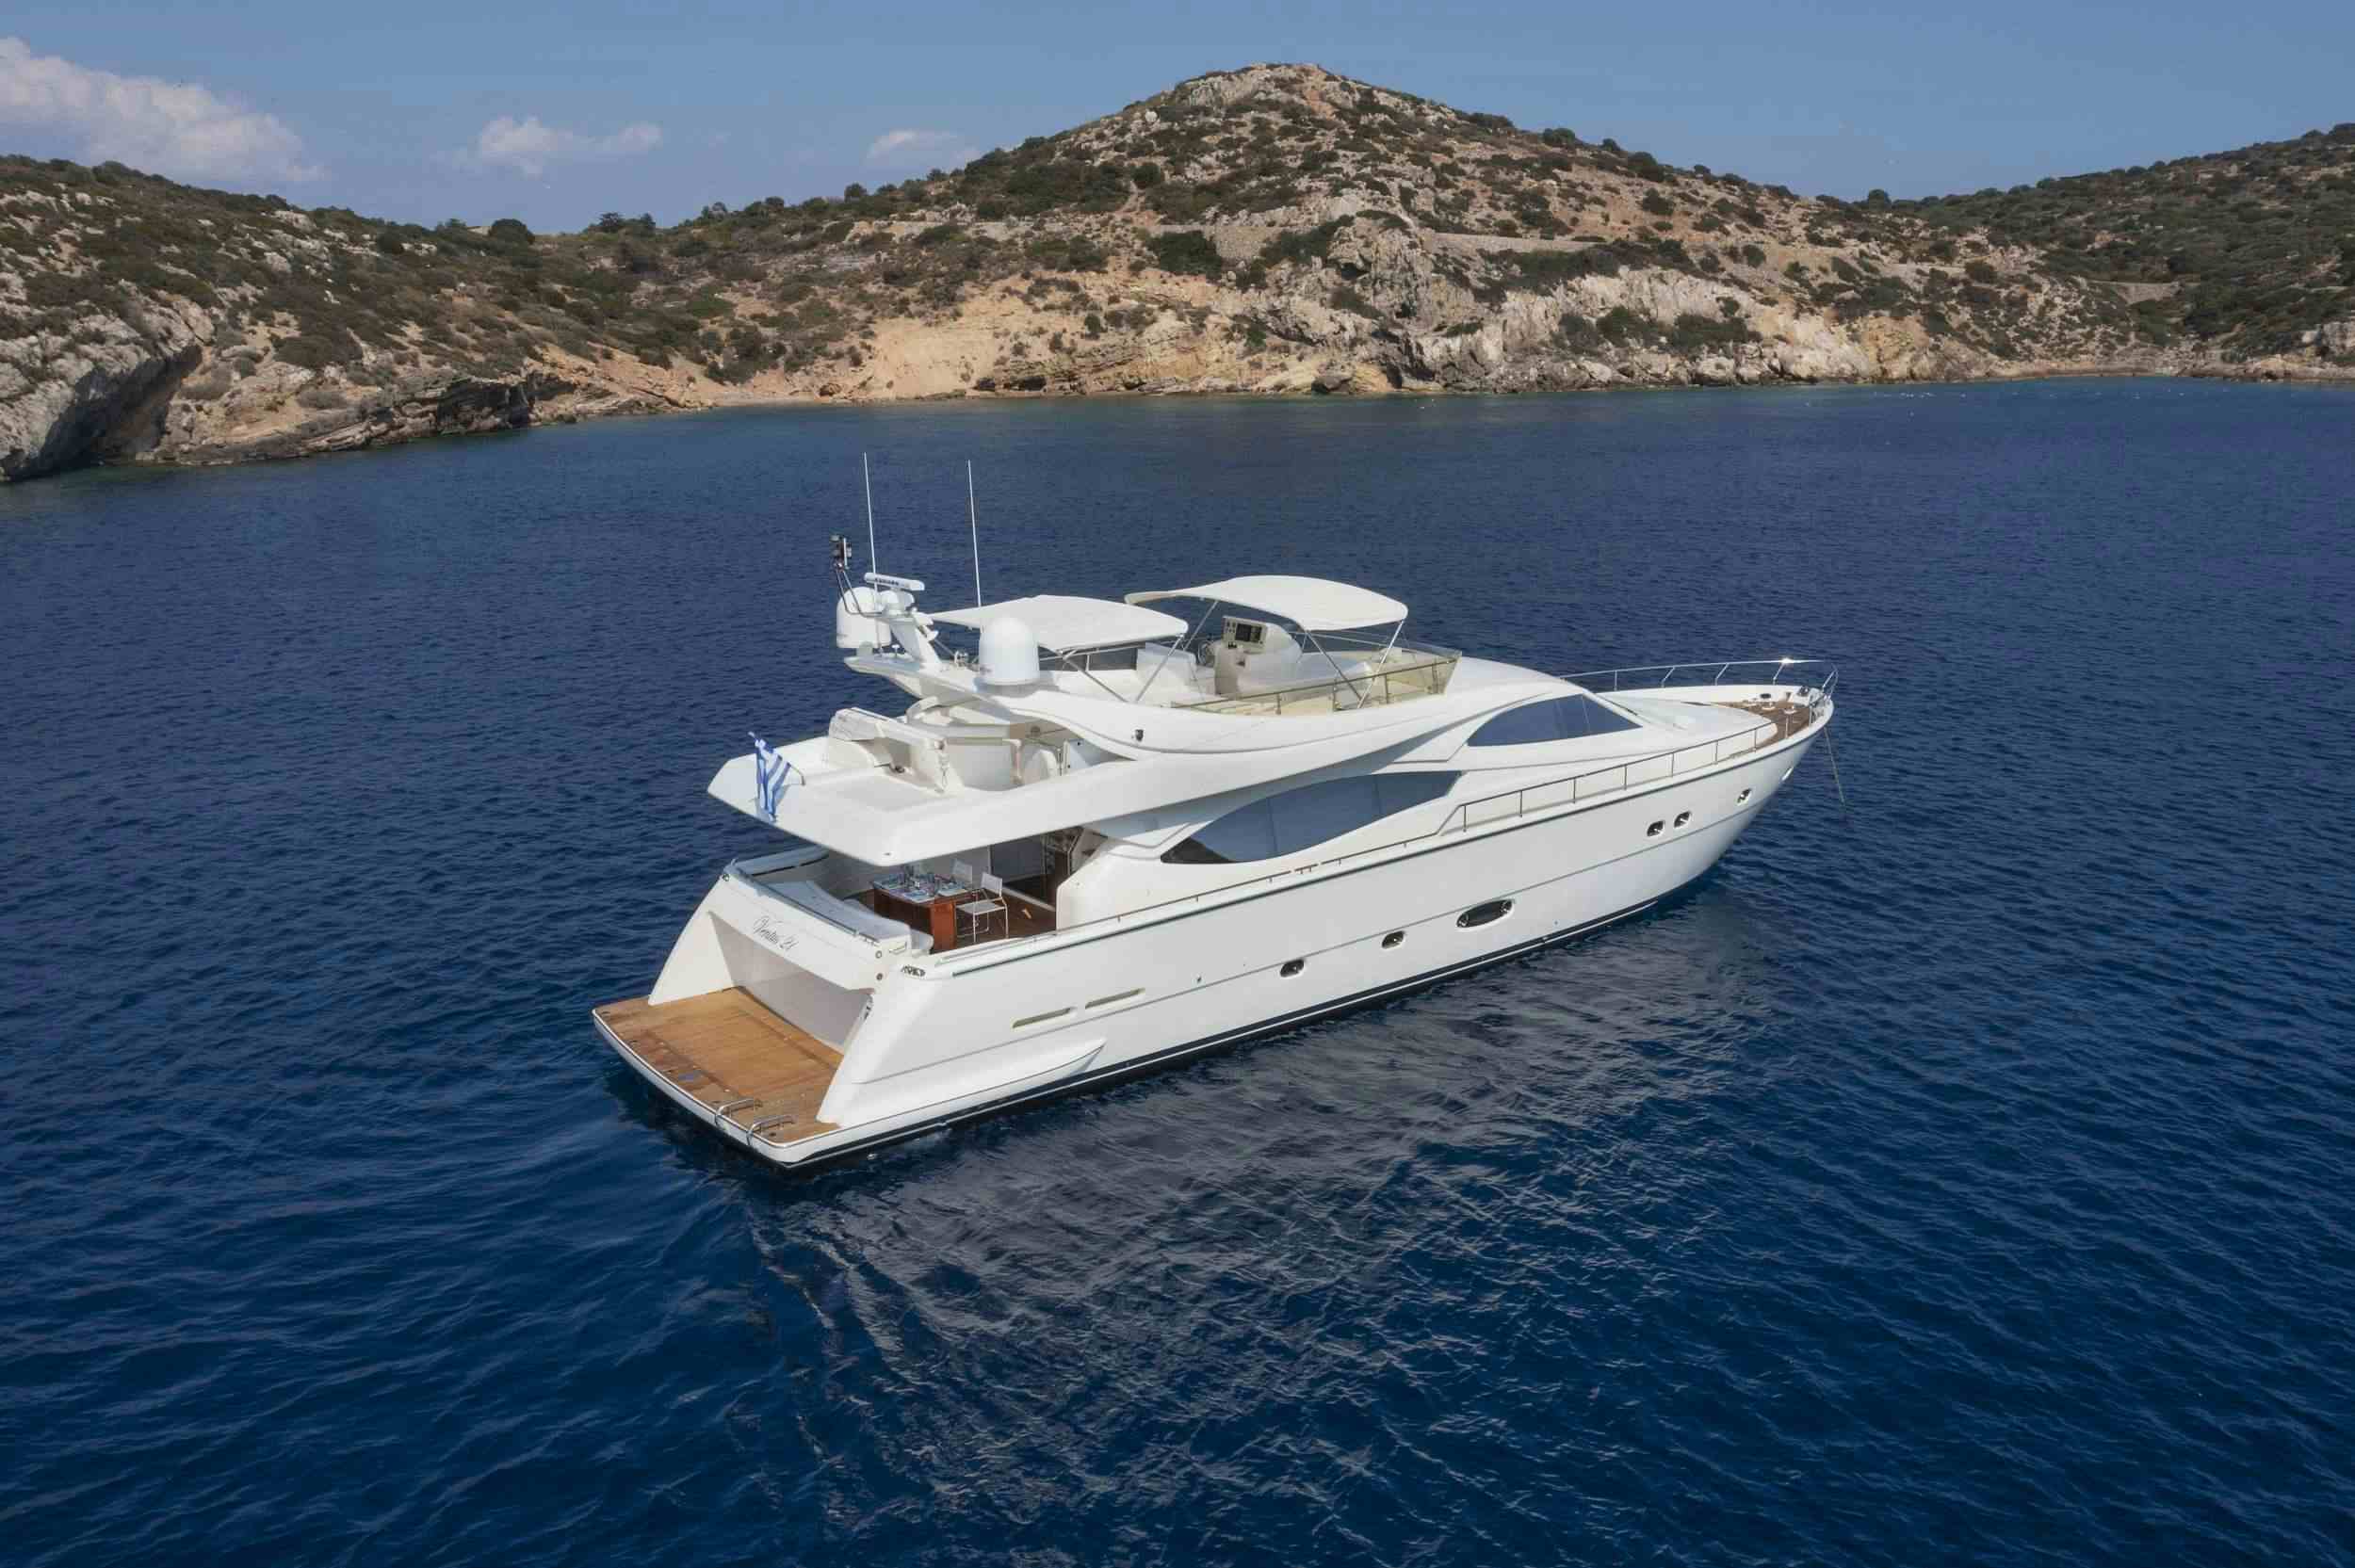 Ventus 21 - Yacht Charter Thasos & Boat hire in Greece 1